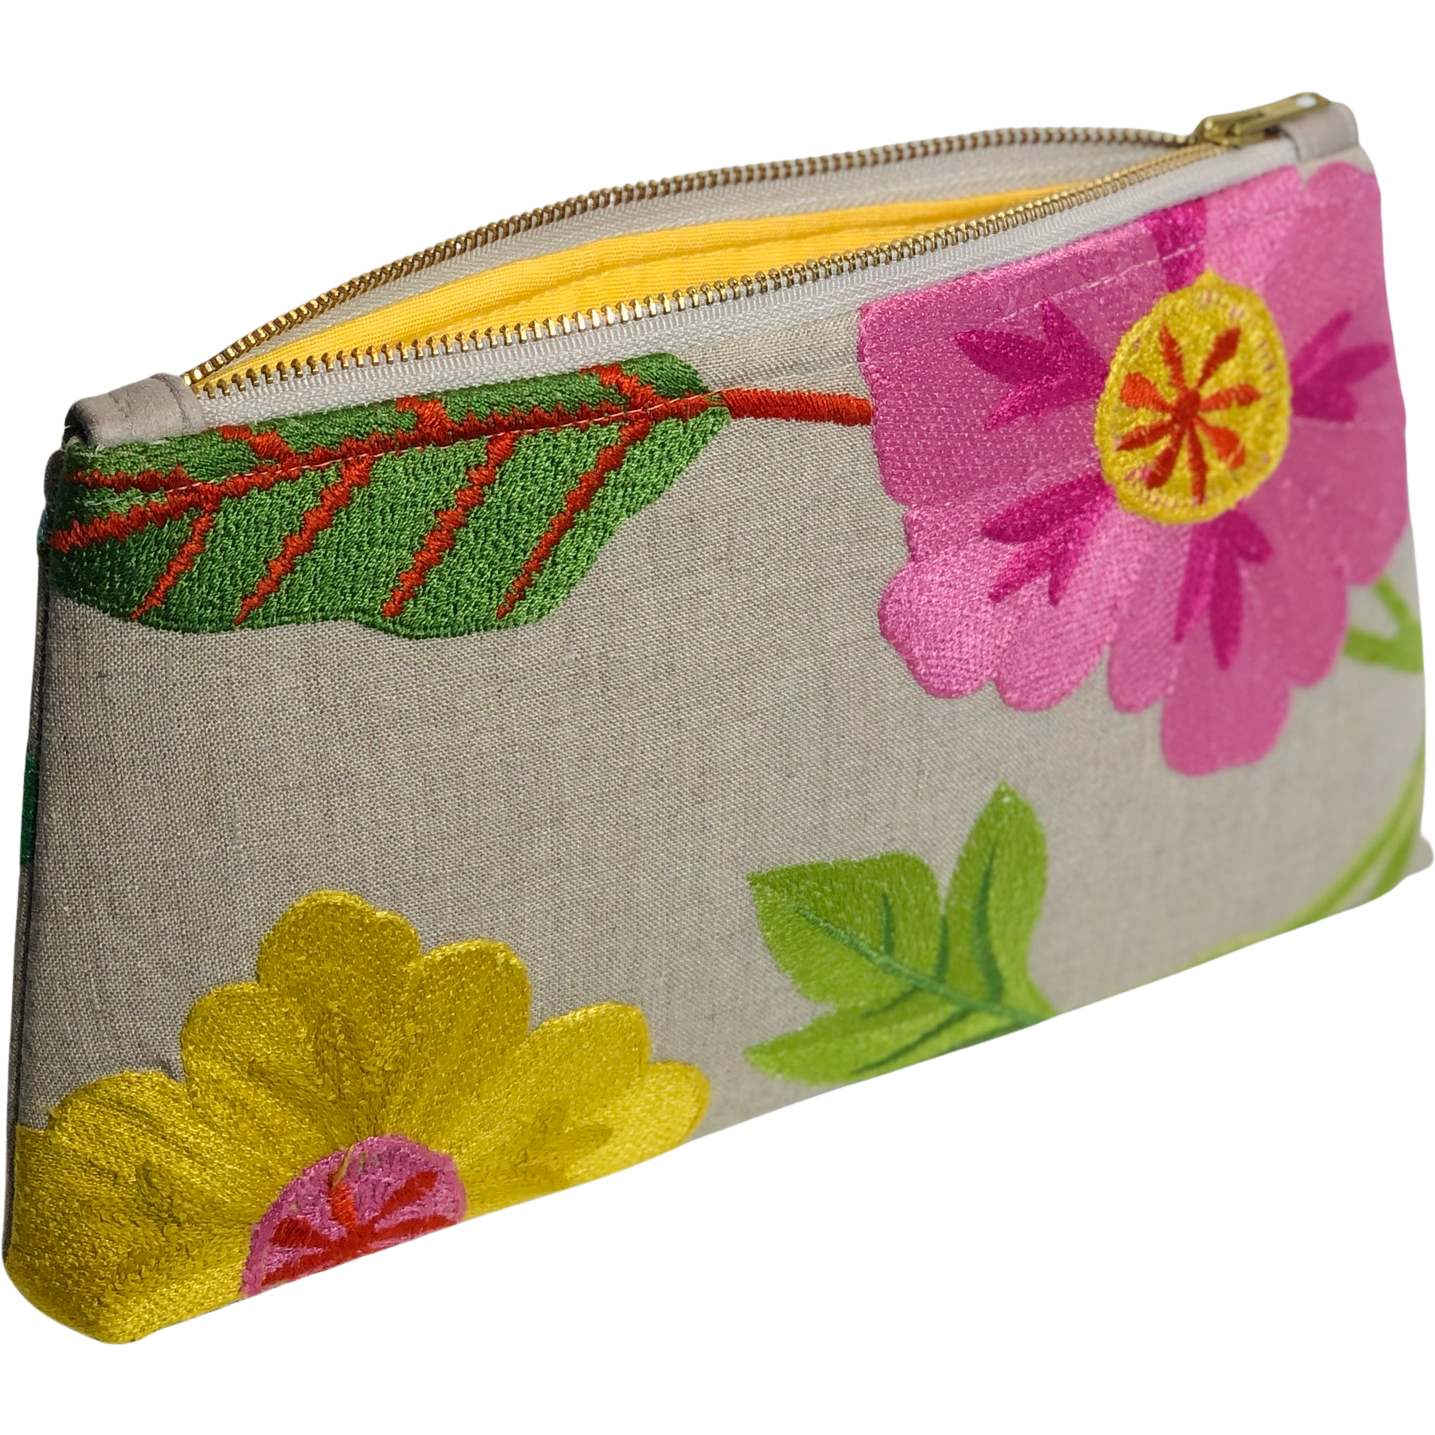 Embroidered Floral Clutch